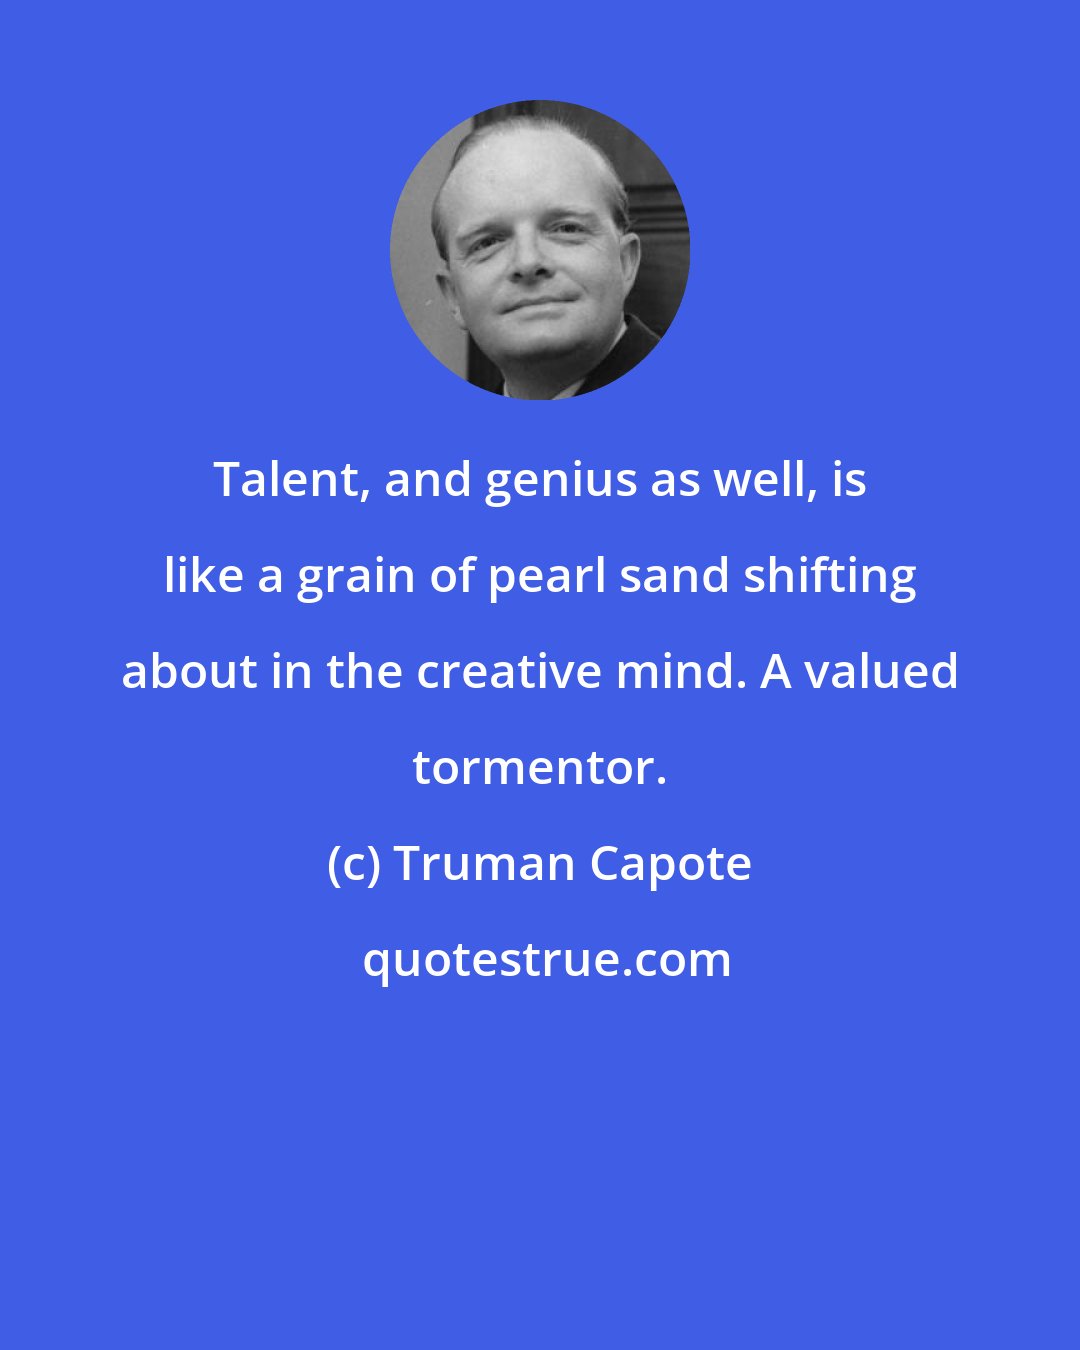 Truman Capote: Talent, and genius as well, is like a grain of pearl sand shifting about in the creative mind. A valued tormentor.